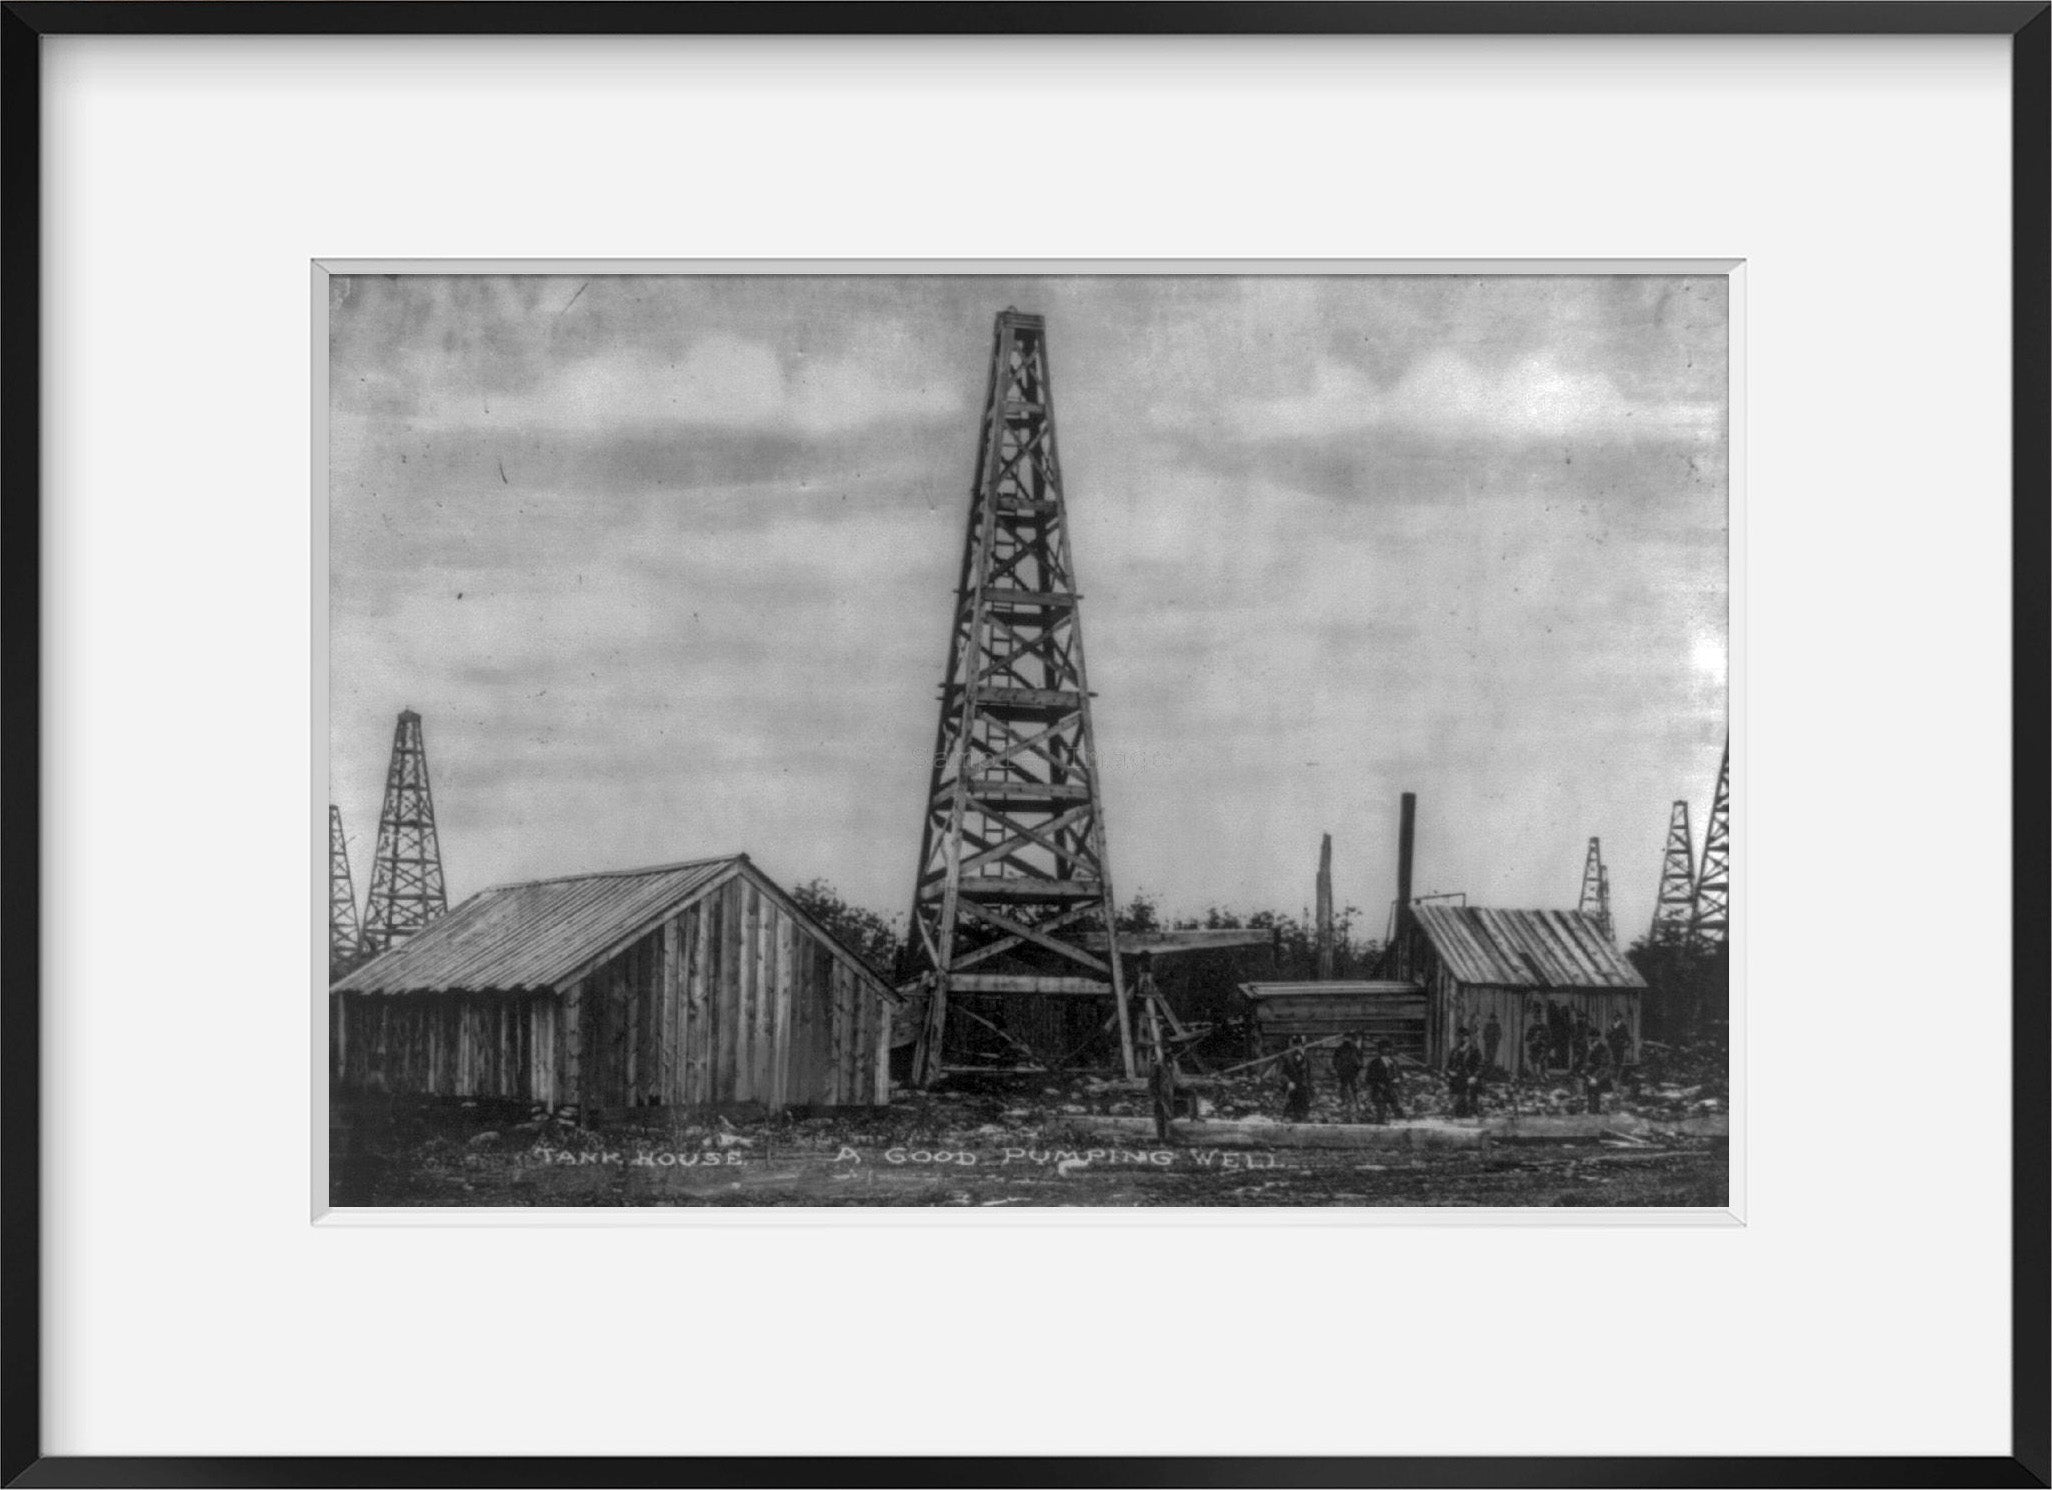 Photo: Tank house, good pumping oil well, industry, commercial, Pennsylvania, PA, c191